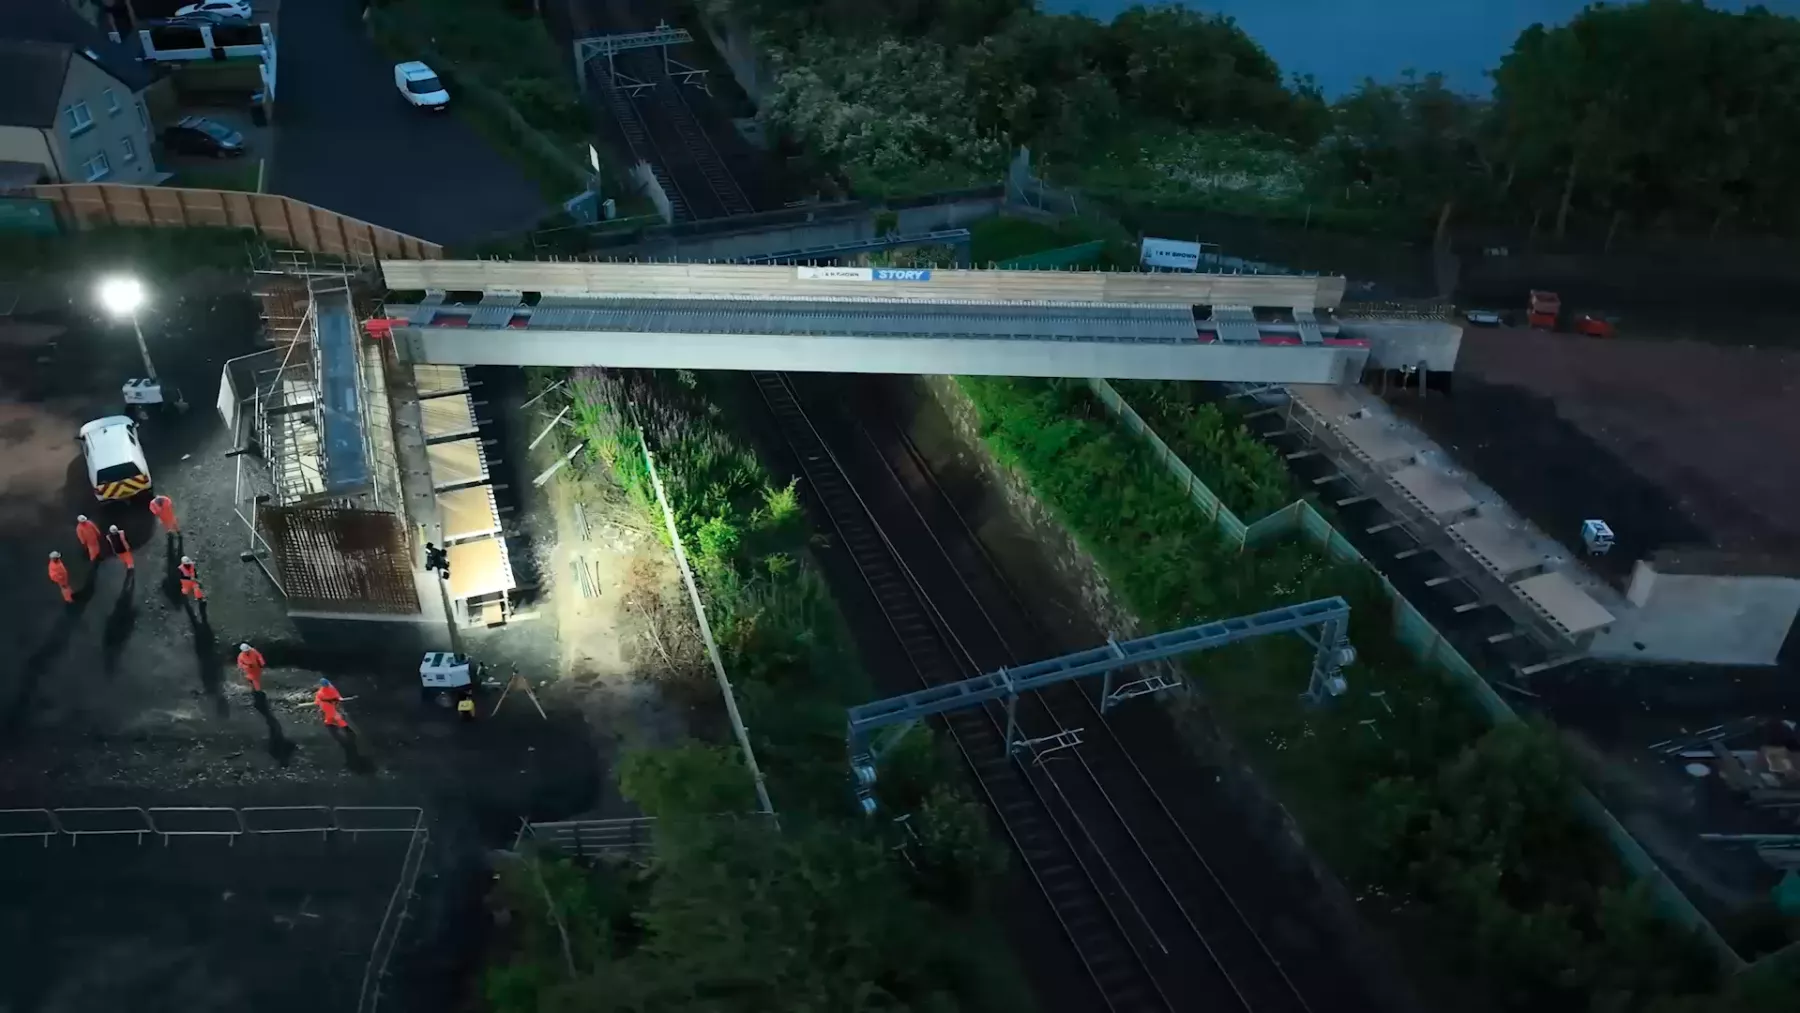 Shot from a drone - workers dressed in orange hi-vis clothing in the very early morning in low light beside the railway line at Winchburgh, West Lothian. A new bridge is being constructed. Floodlights are in use.